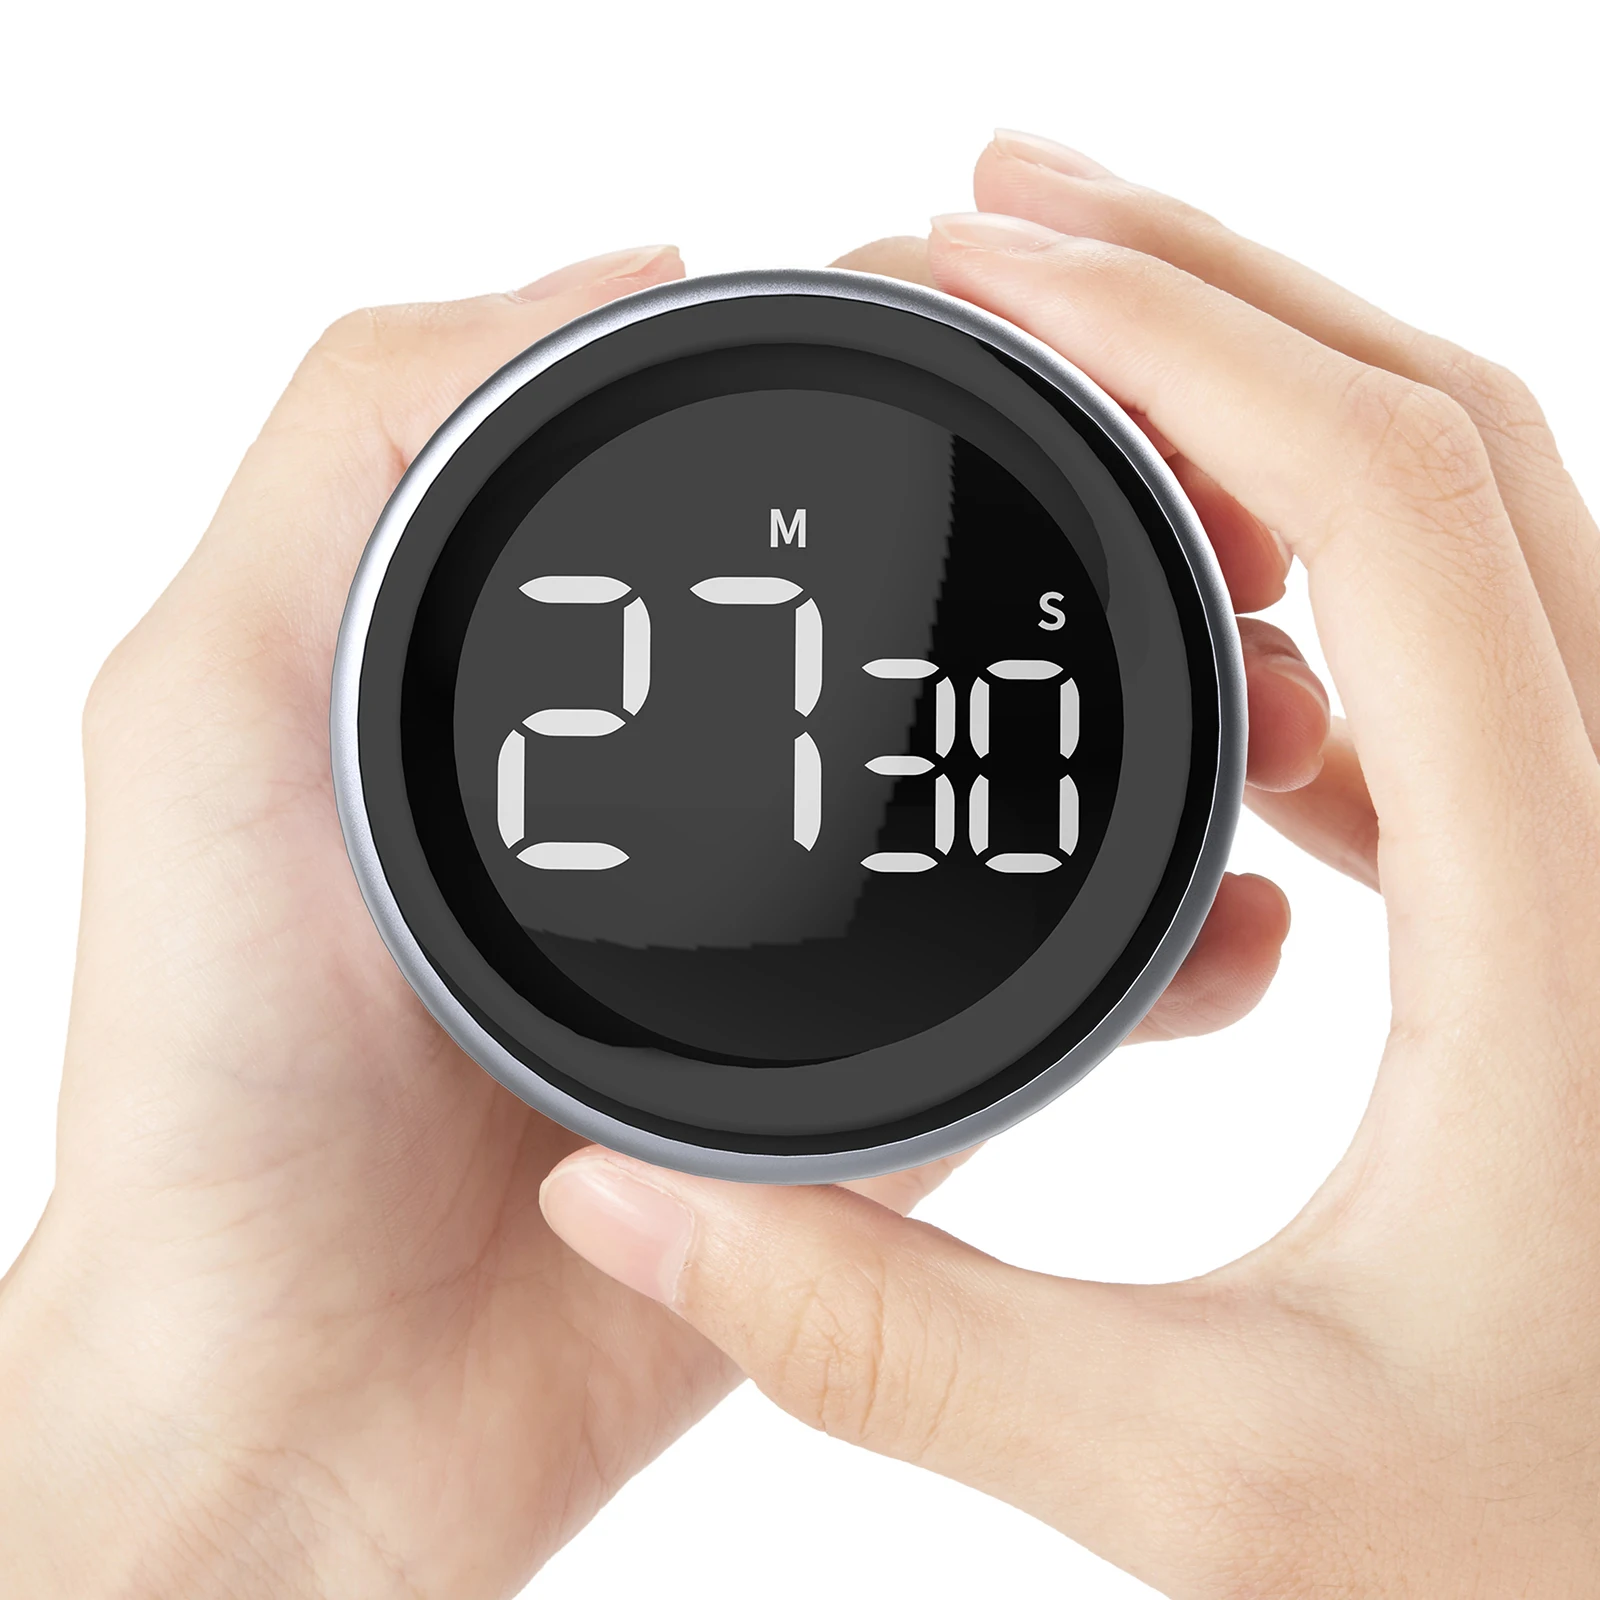 

NEW Arrival HAPTIME Knob Digital Kitchen Countdown Timer Magnetic LCD Large Display Countdown Timer, Black (can oem)